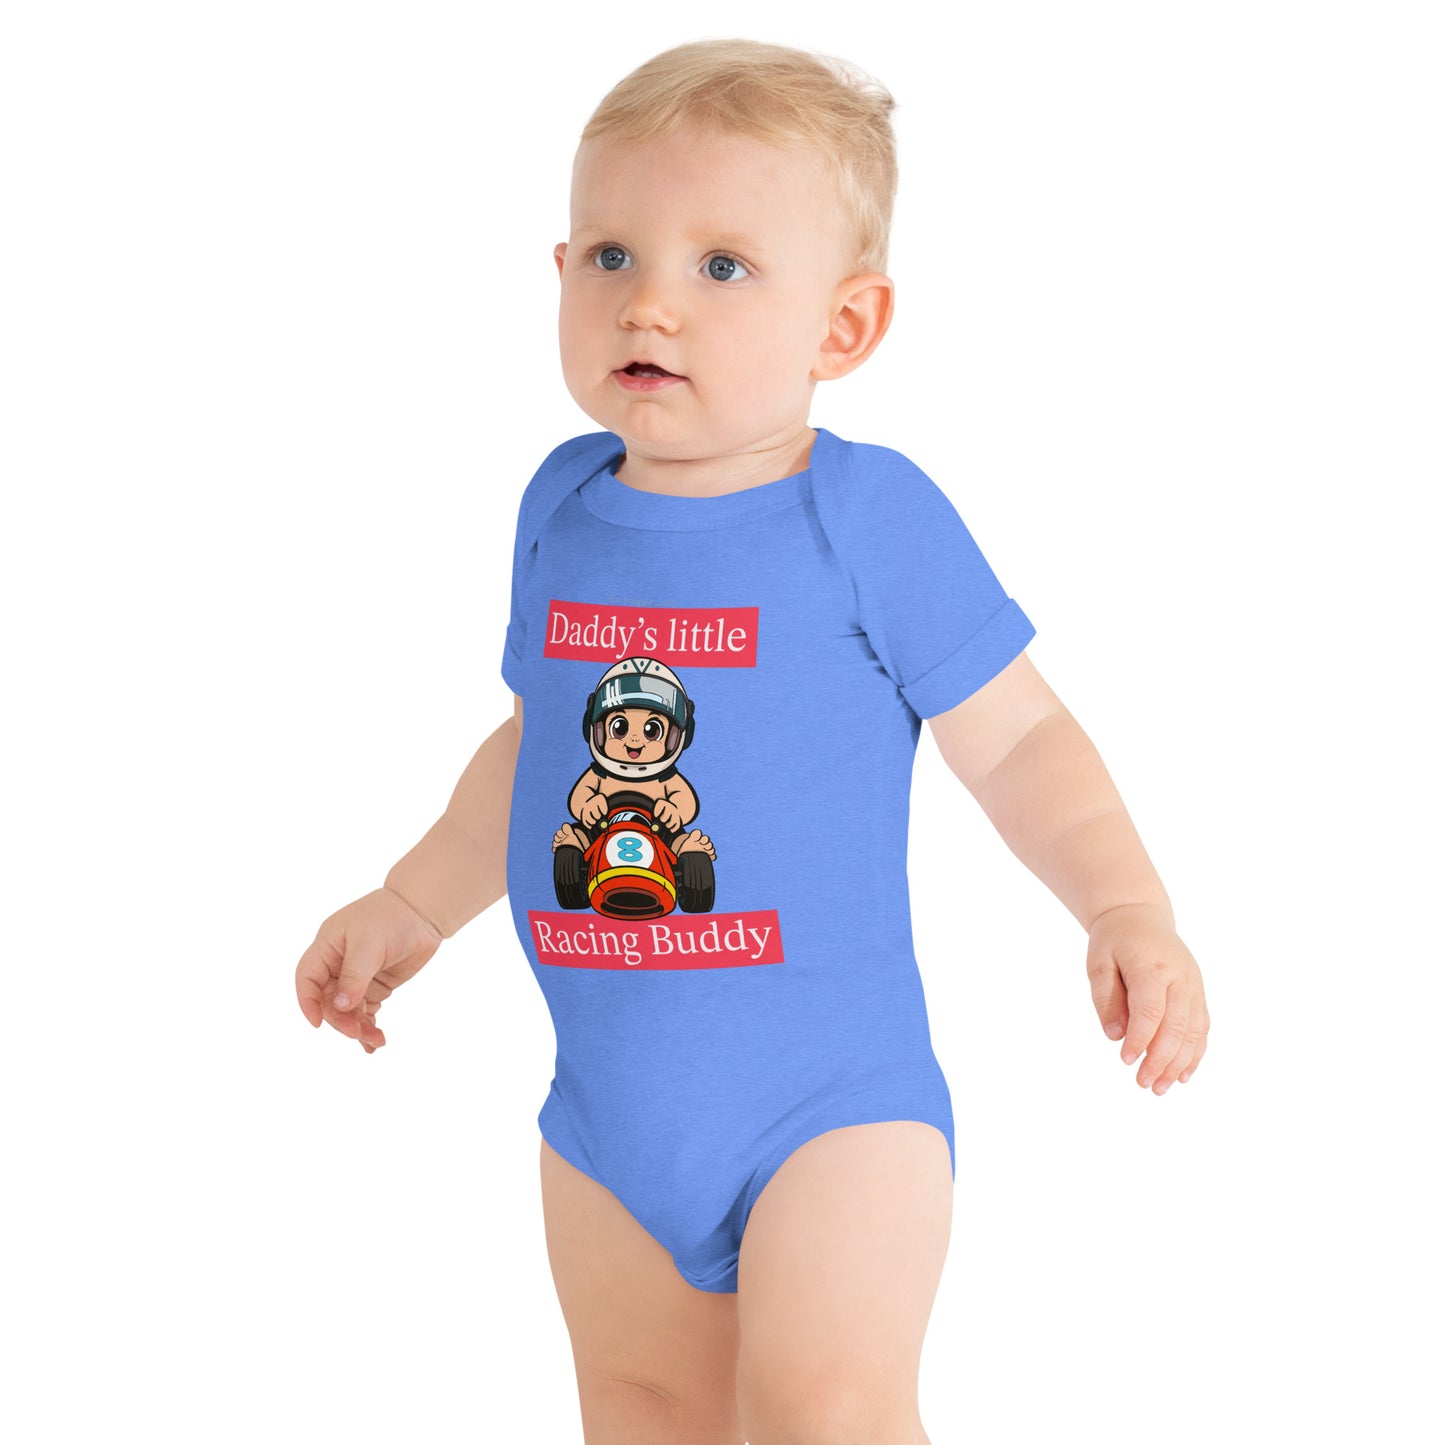 Daddy's Little Racing Buddy - Baby Short Sleeve One Piece